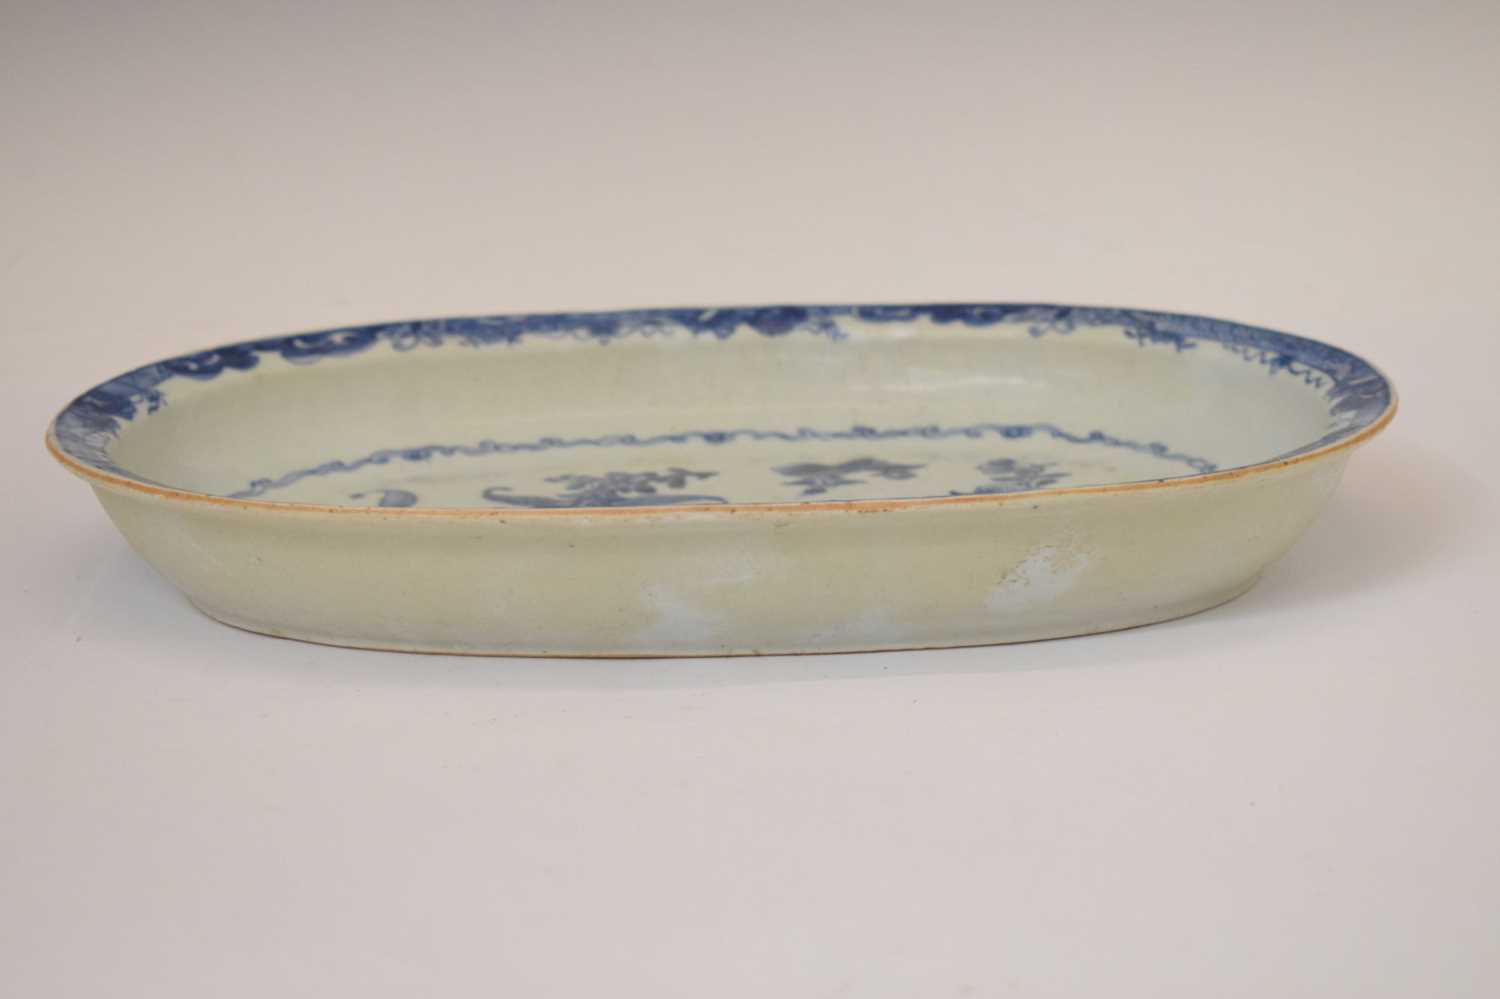 Chinese export porcelain blue and white oval dish - Image 8 of 16